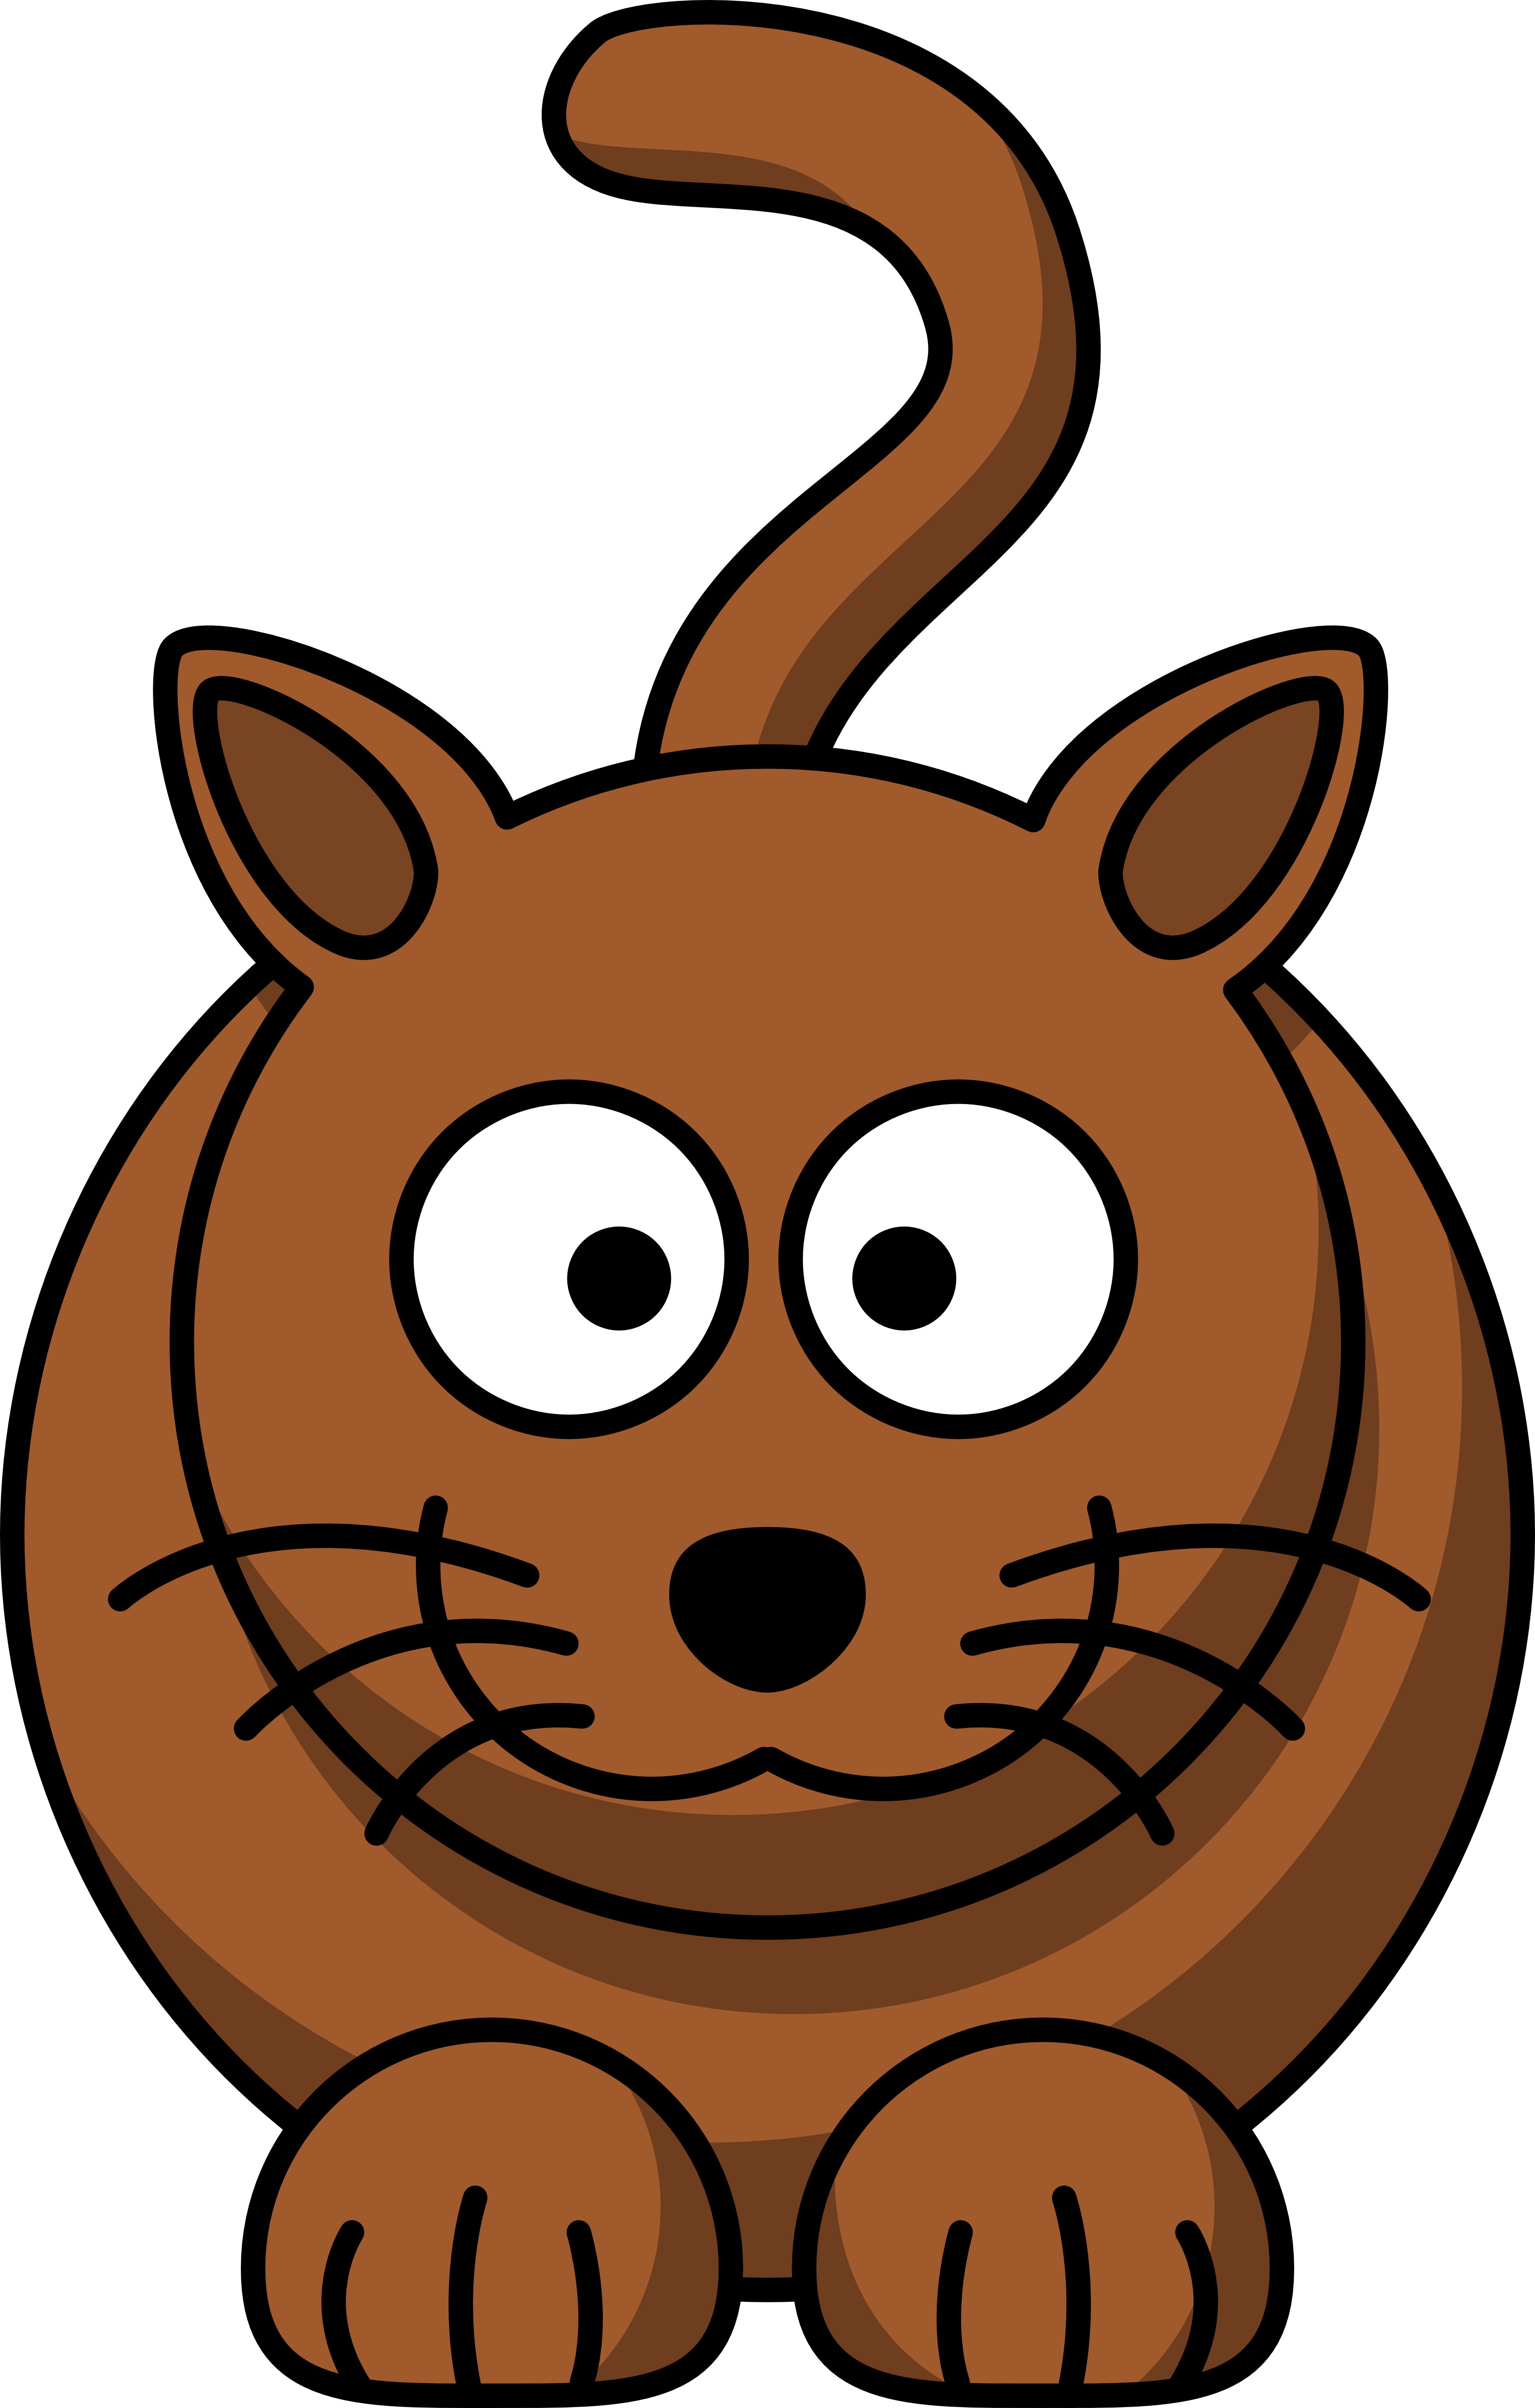 lemmling cartoon cat scalable vector graphics svg ...